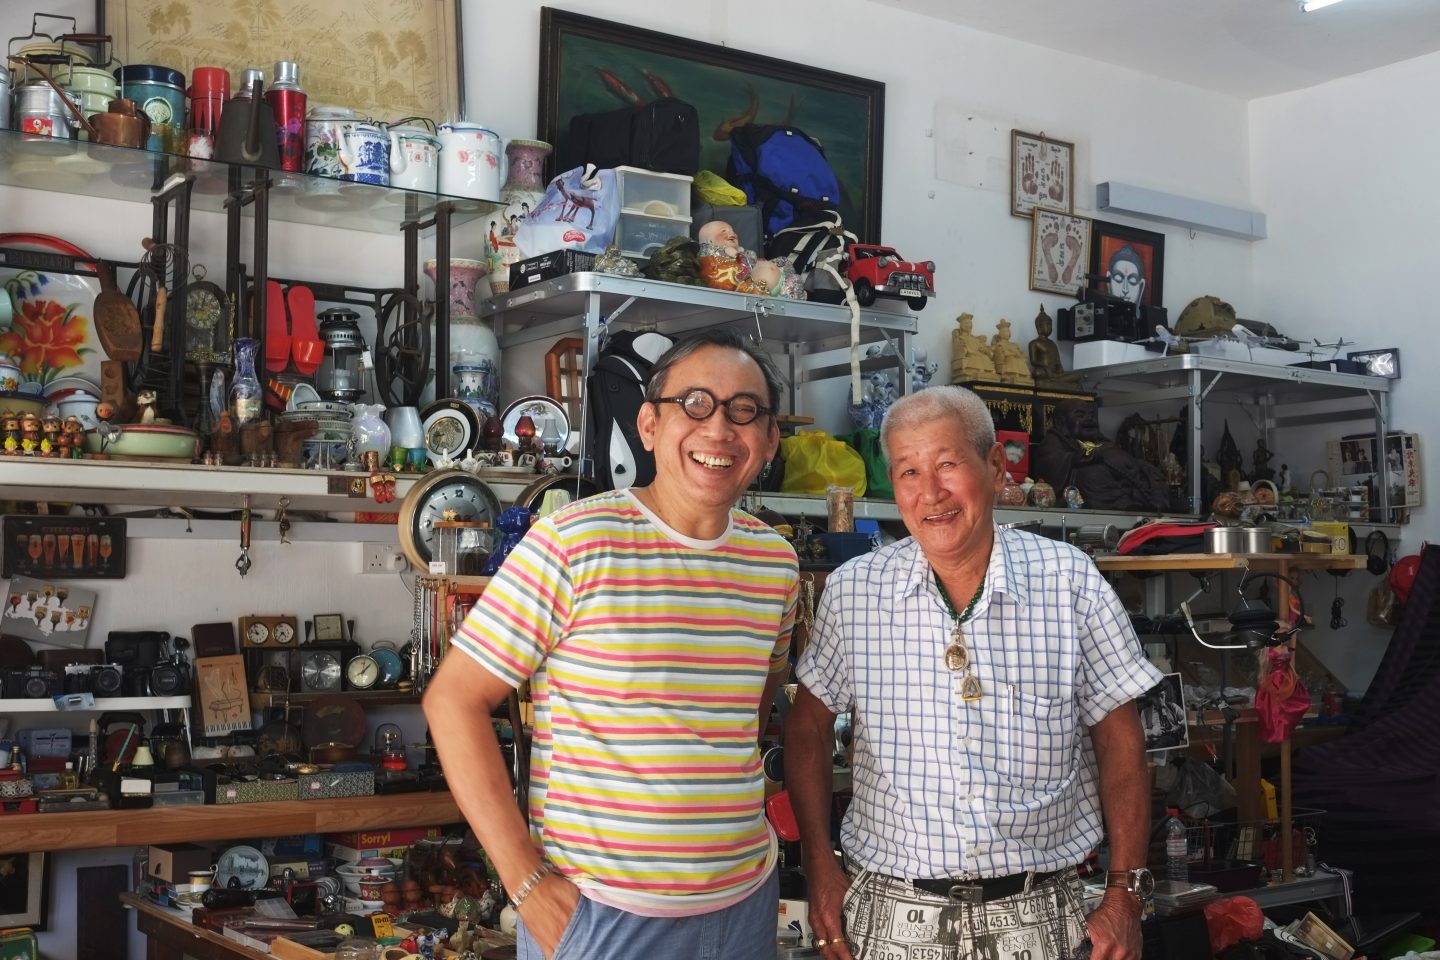 Former Sungei Road Market vendor Tang Khai Lam (right), 69, is just happy to have a place he can finally settle in, thanks to the founder of The Peranakan, Raymond Khoo (left). Photo by Gracia Lee.